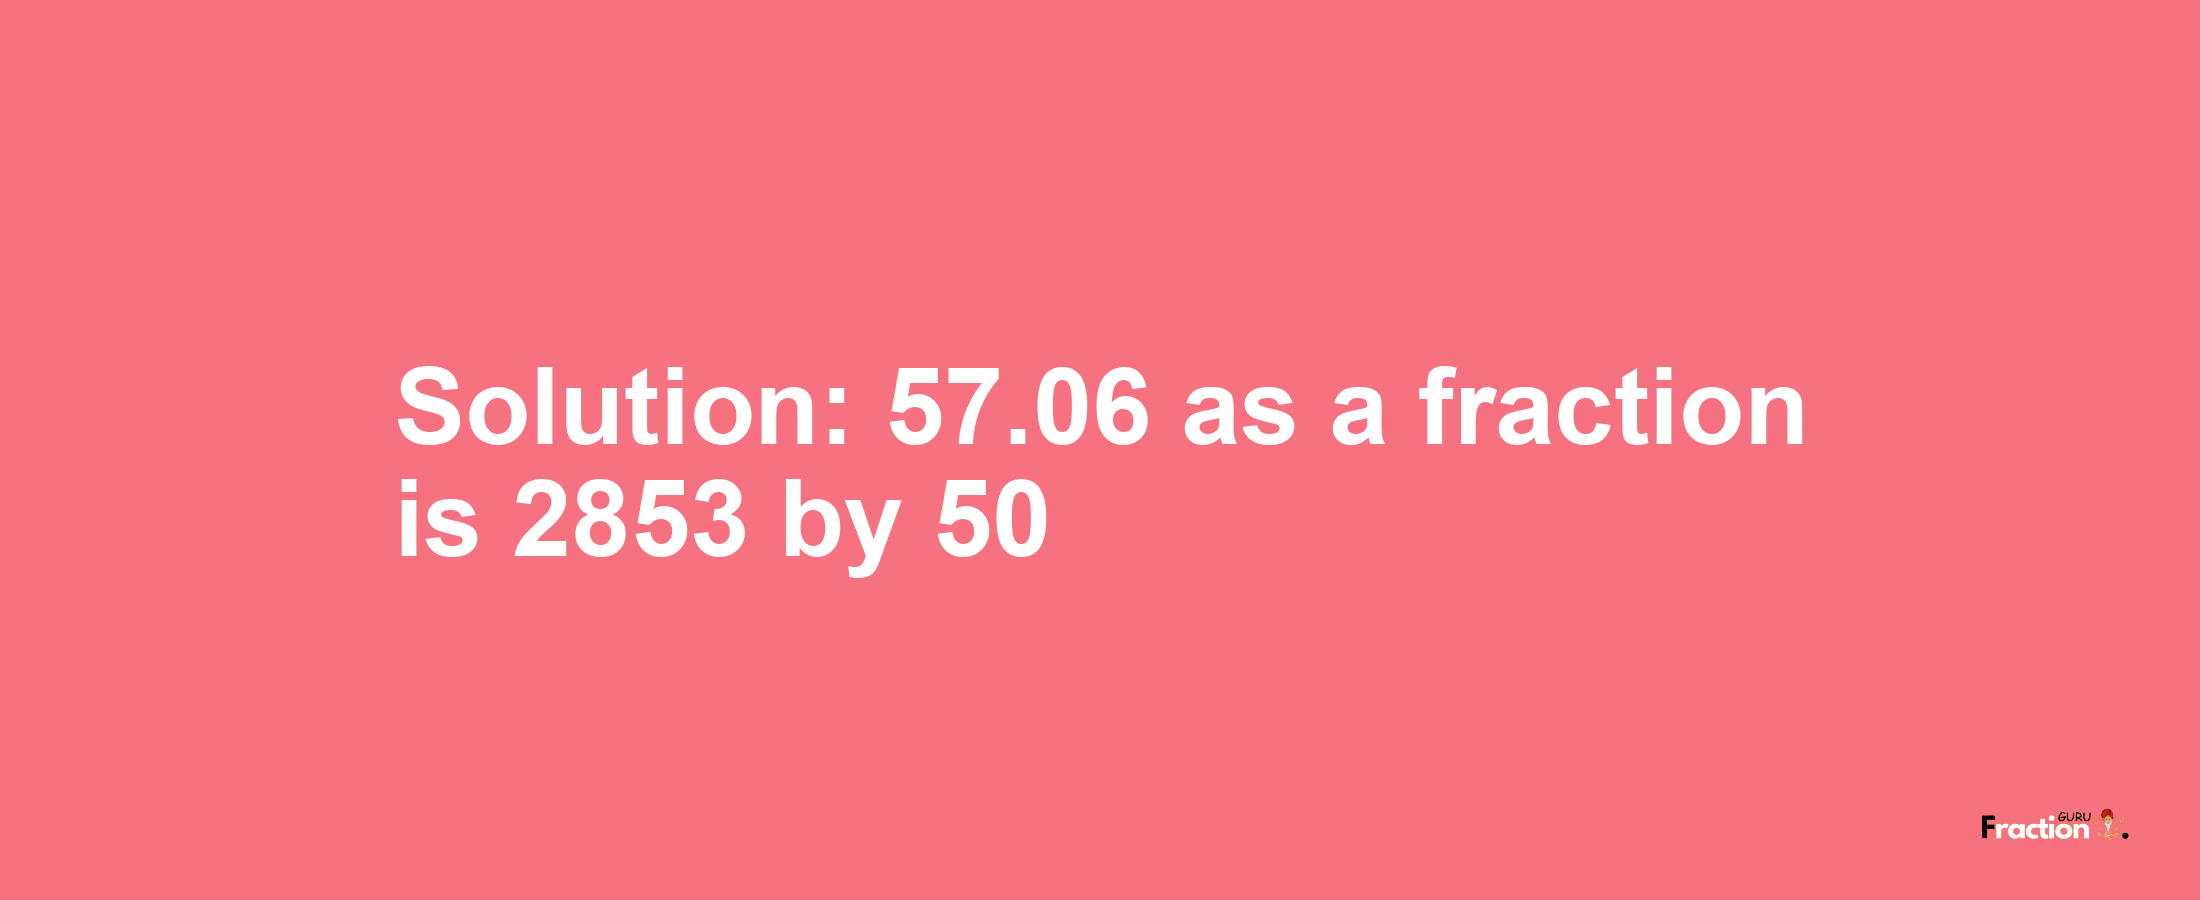 Solution:57.06 as a fraction is 2853/50